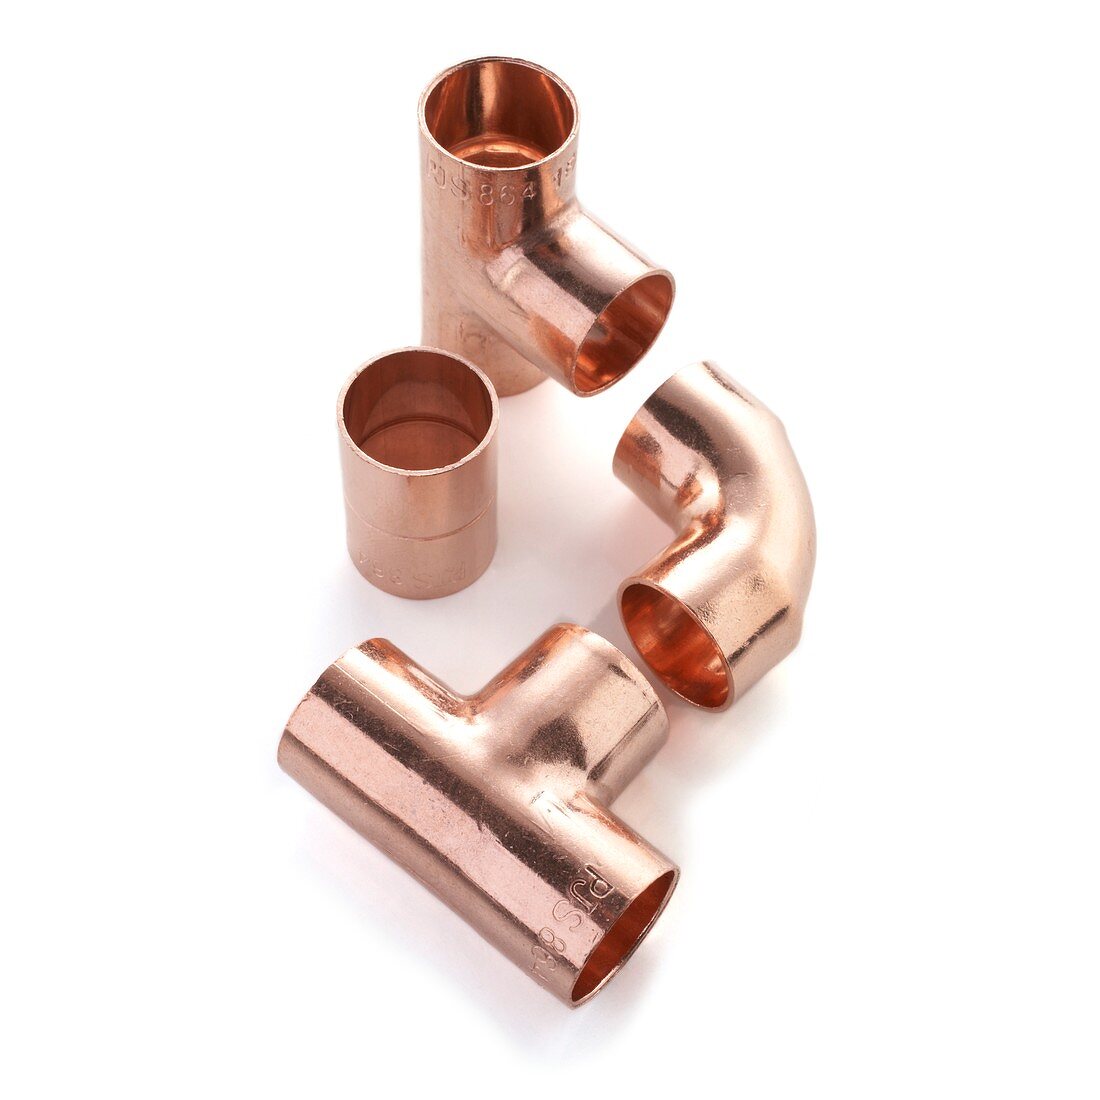 Copper pipe sections